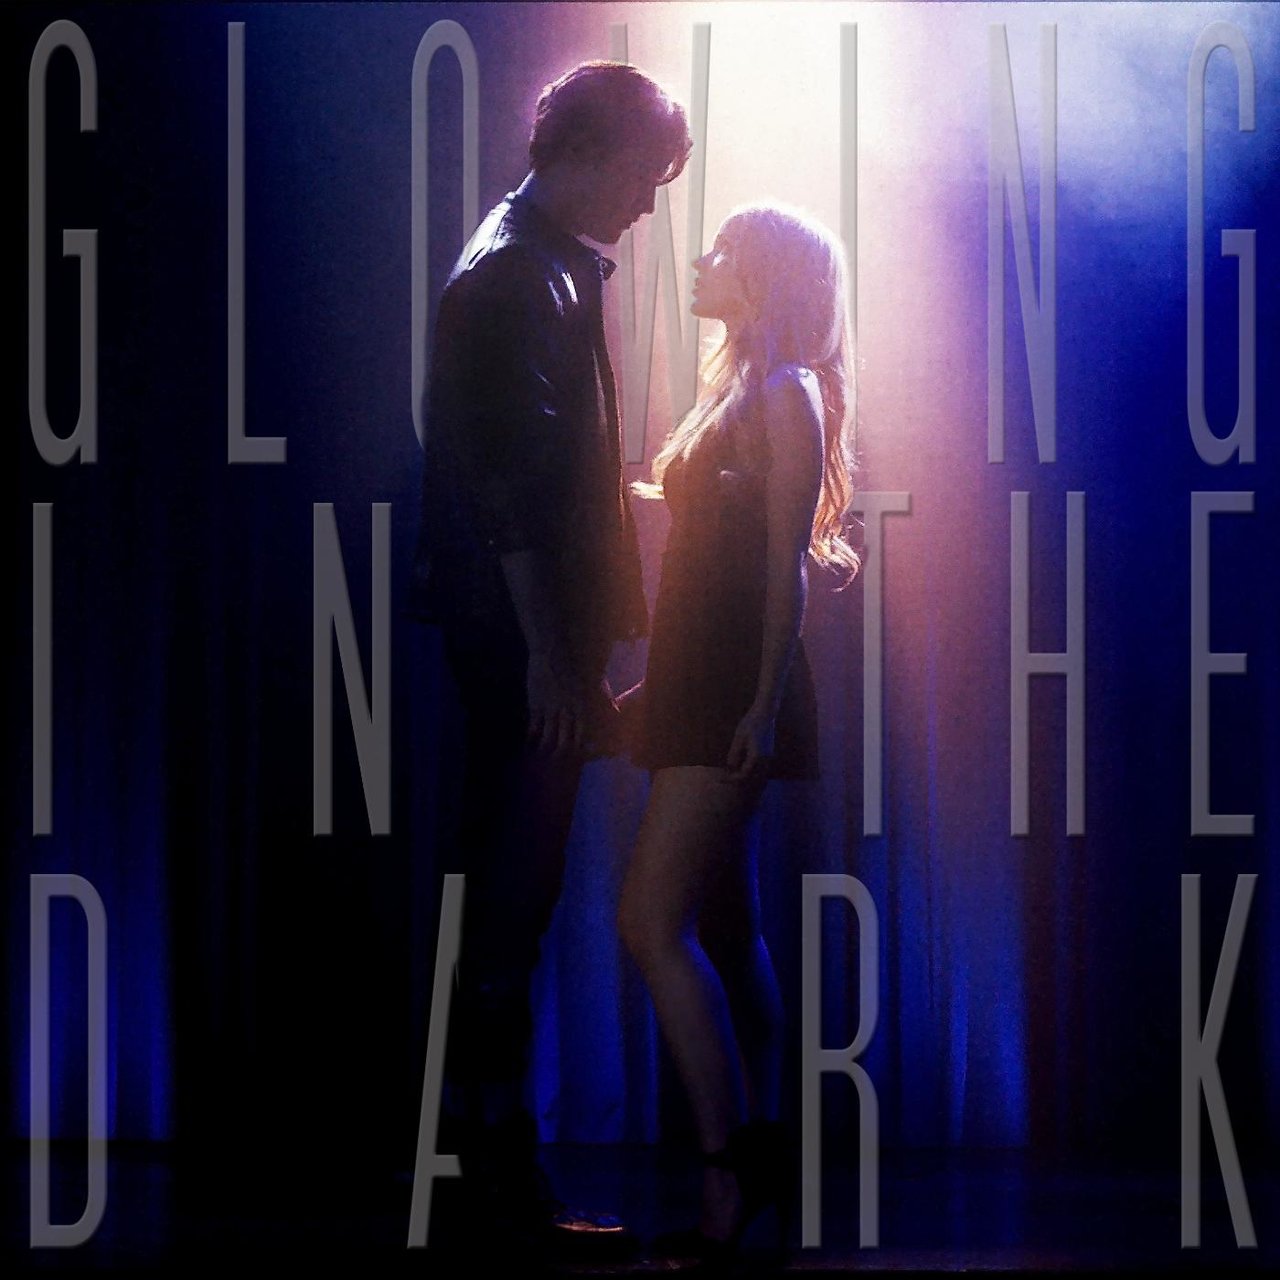 The Girl and the Dreamcatcher Glowing in the Dark cover artwork